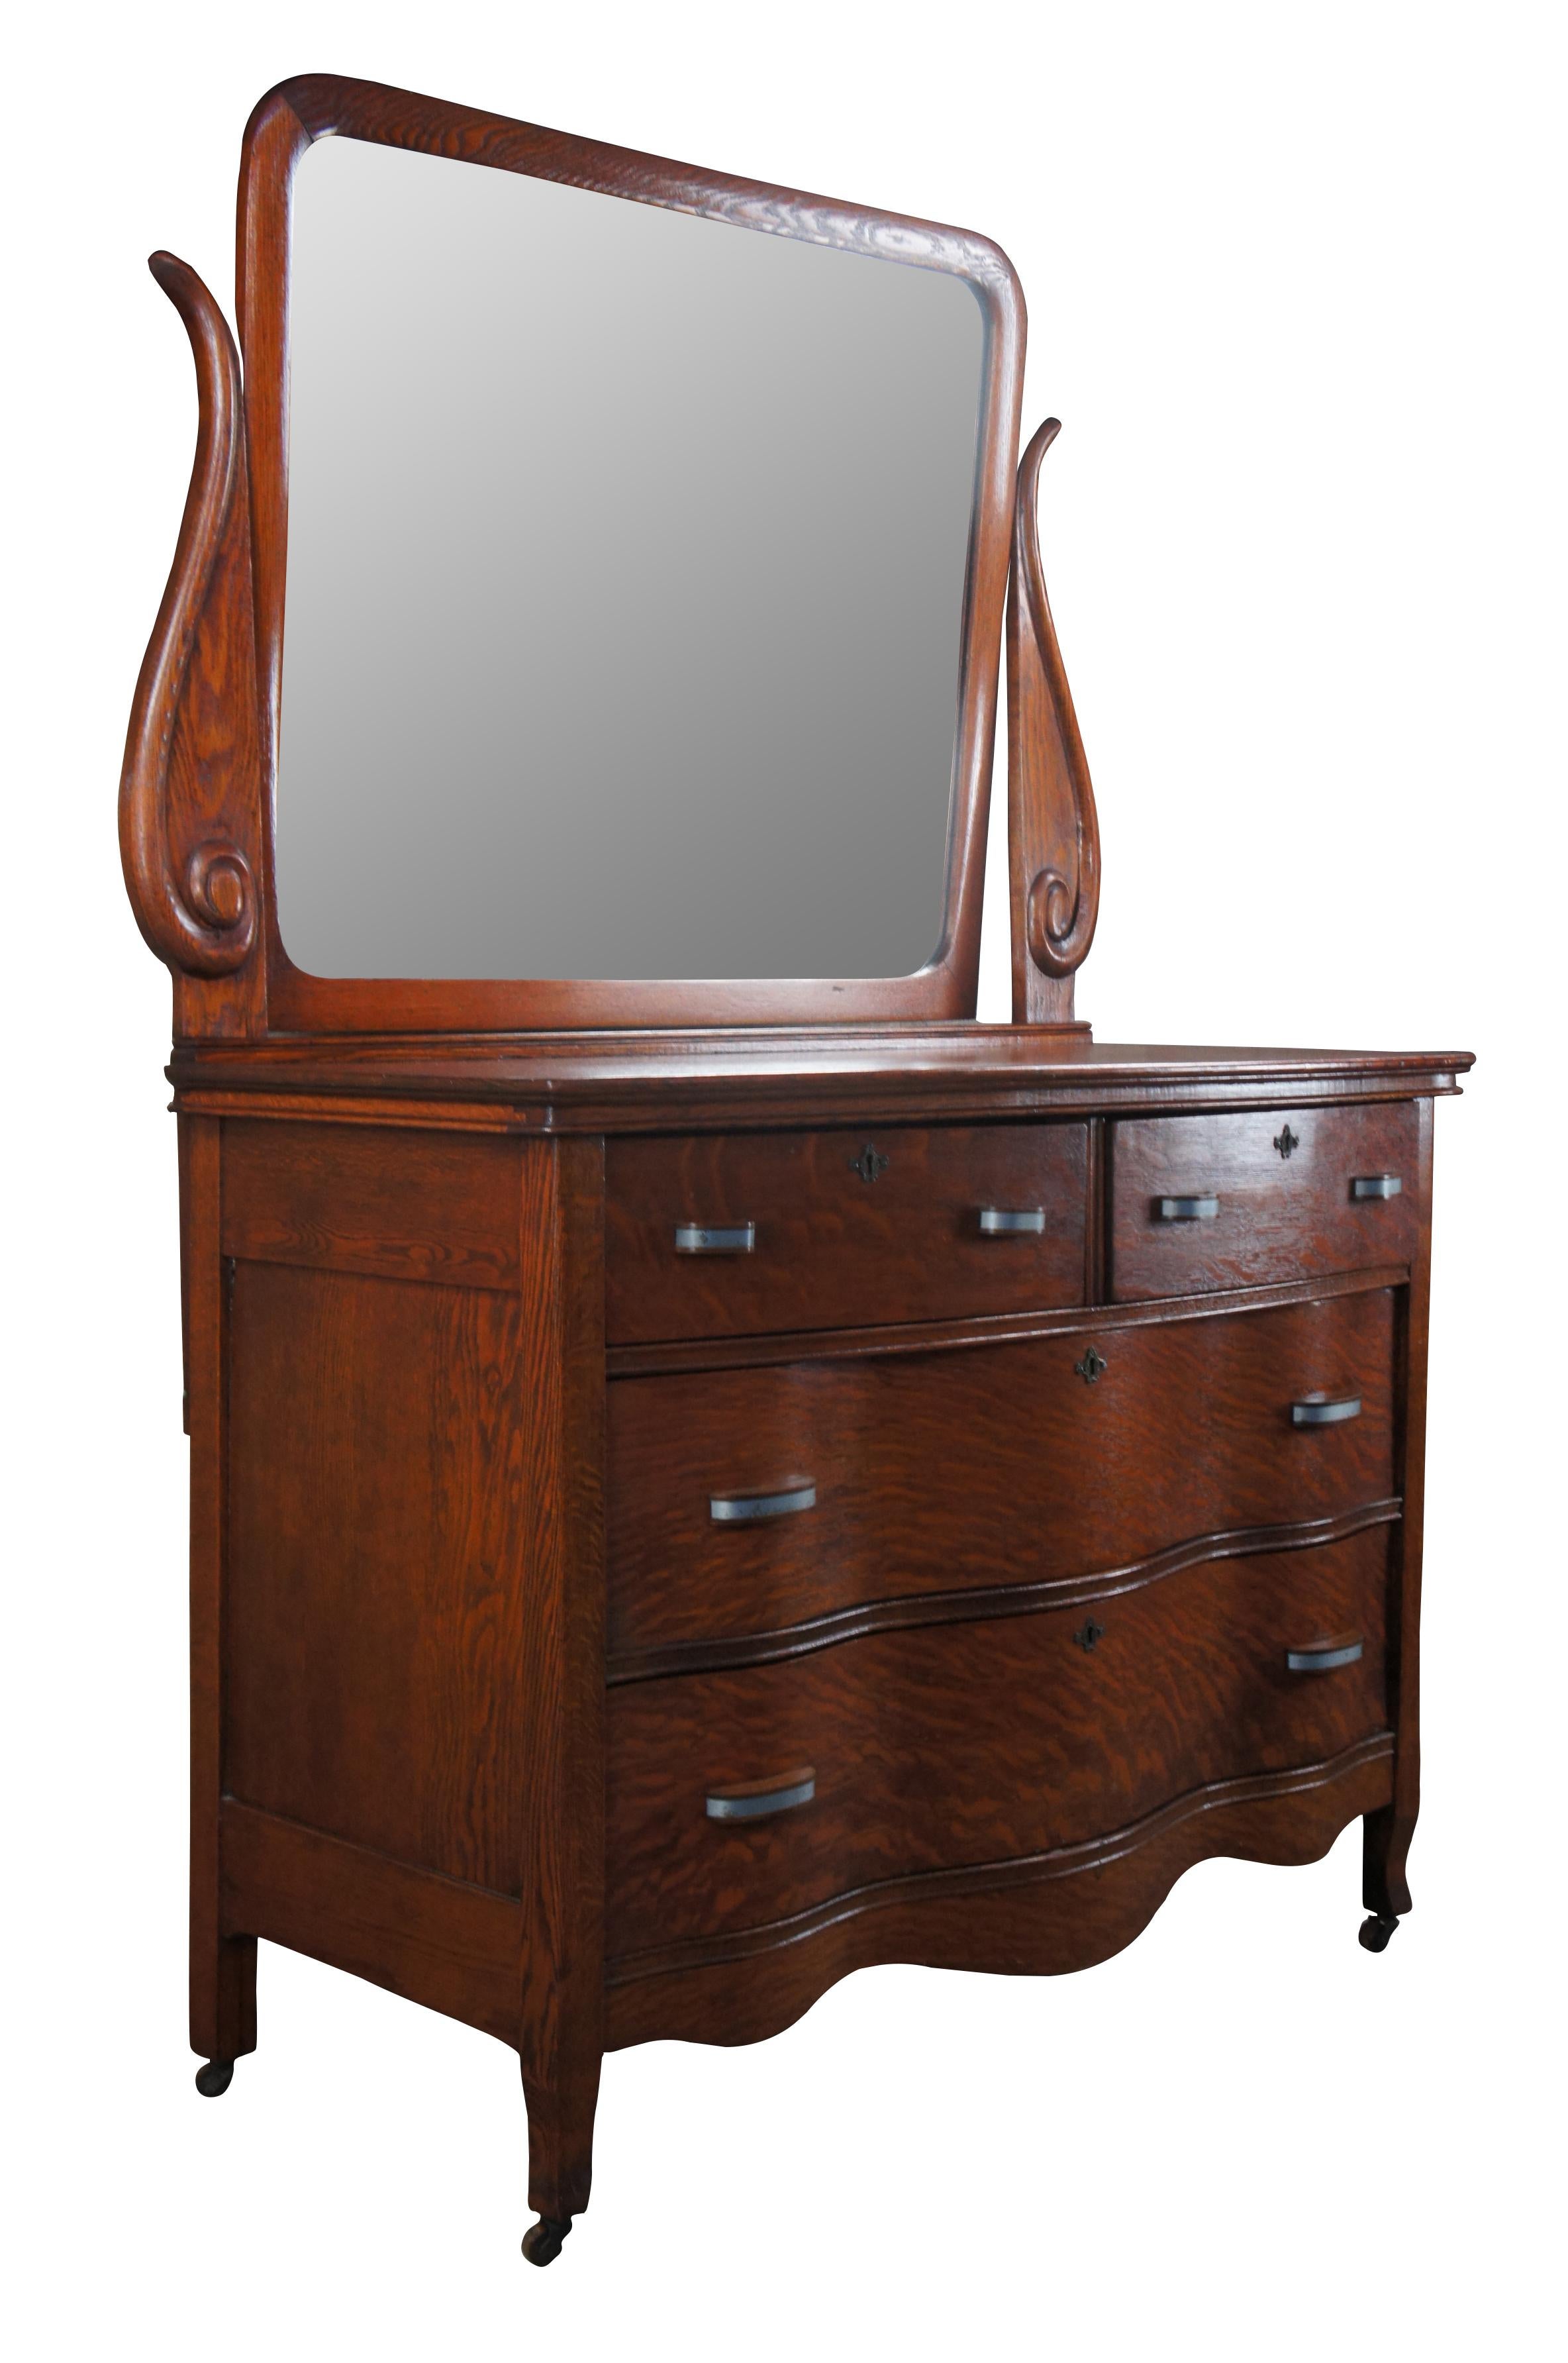 Late 19th century oxbow chest and wishbone mirror. Features a two over two drawer format with dovetailed drawers and an adjustable mirror. The case is supported by flared legs over casters. Marked Watson's improved case Construction along backside.